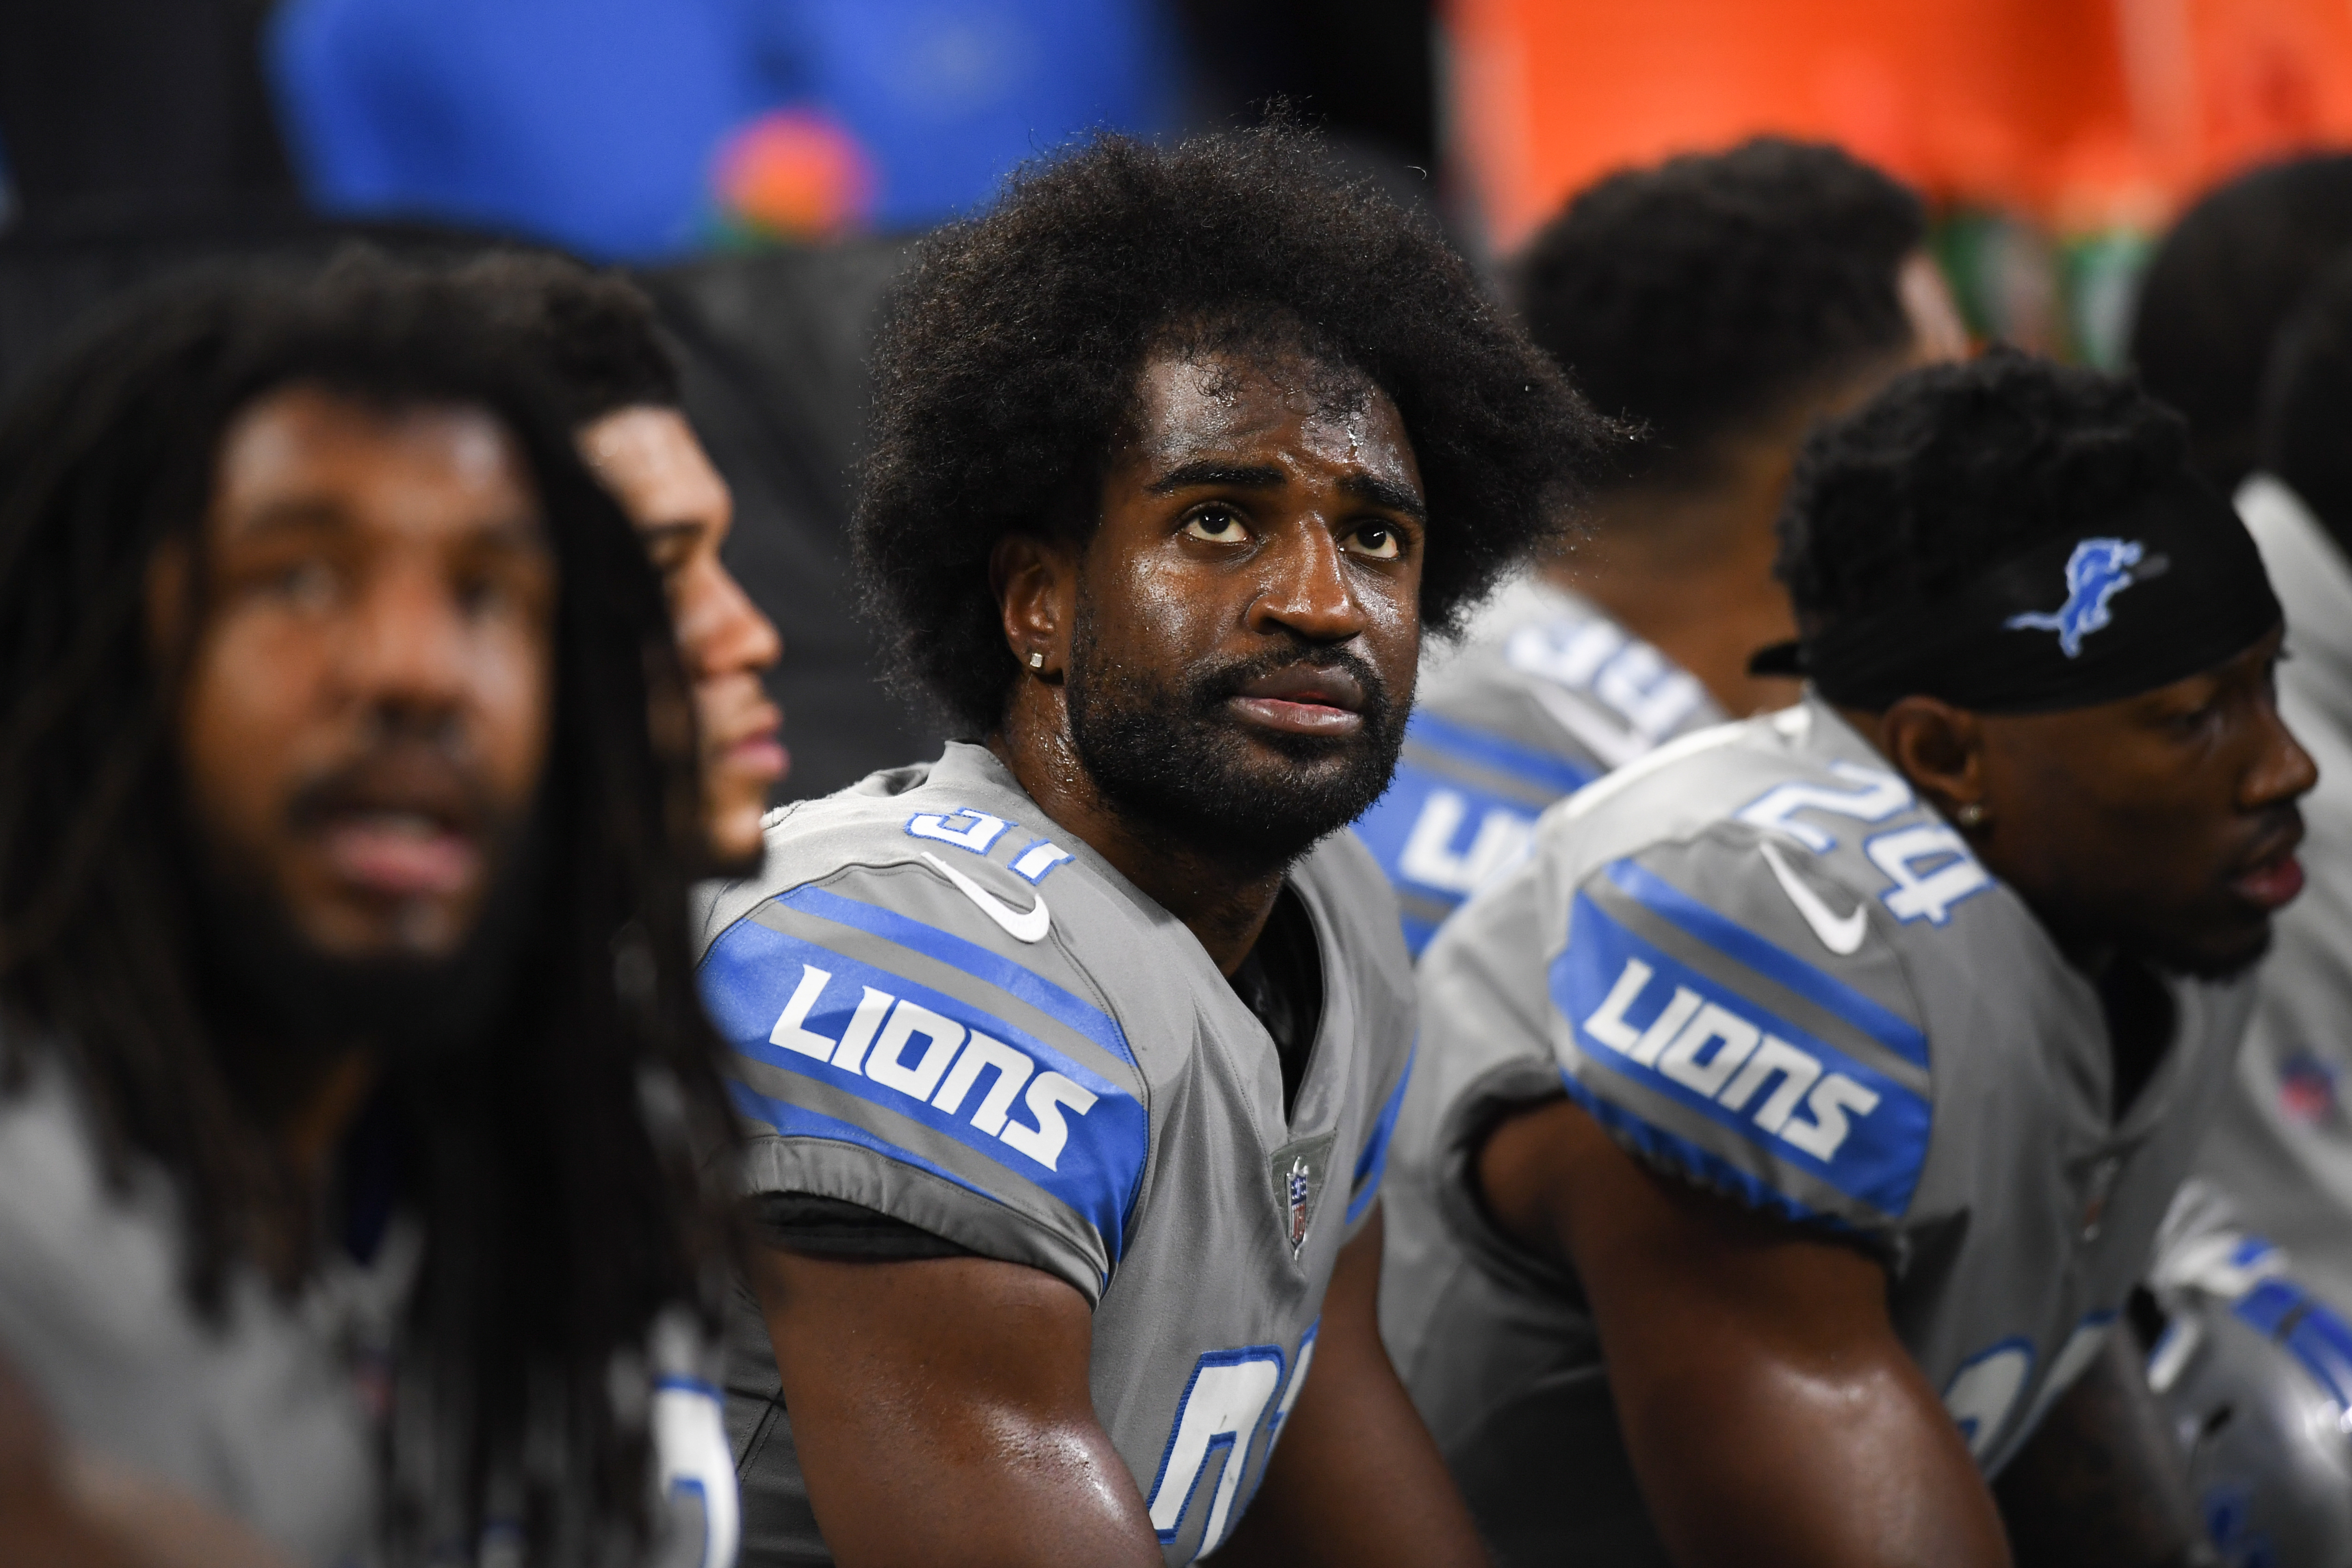 D.J. Hayden of the Detroit Lions during a game against the Chicago Bears on December 16, 2017 in Detroit, Michigan | Source: Getty Images